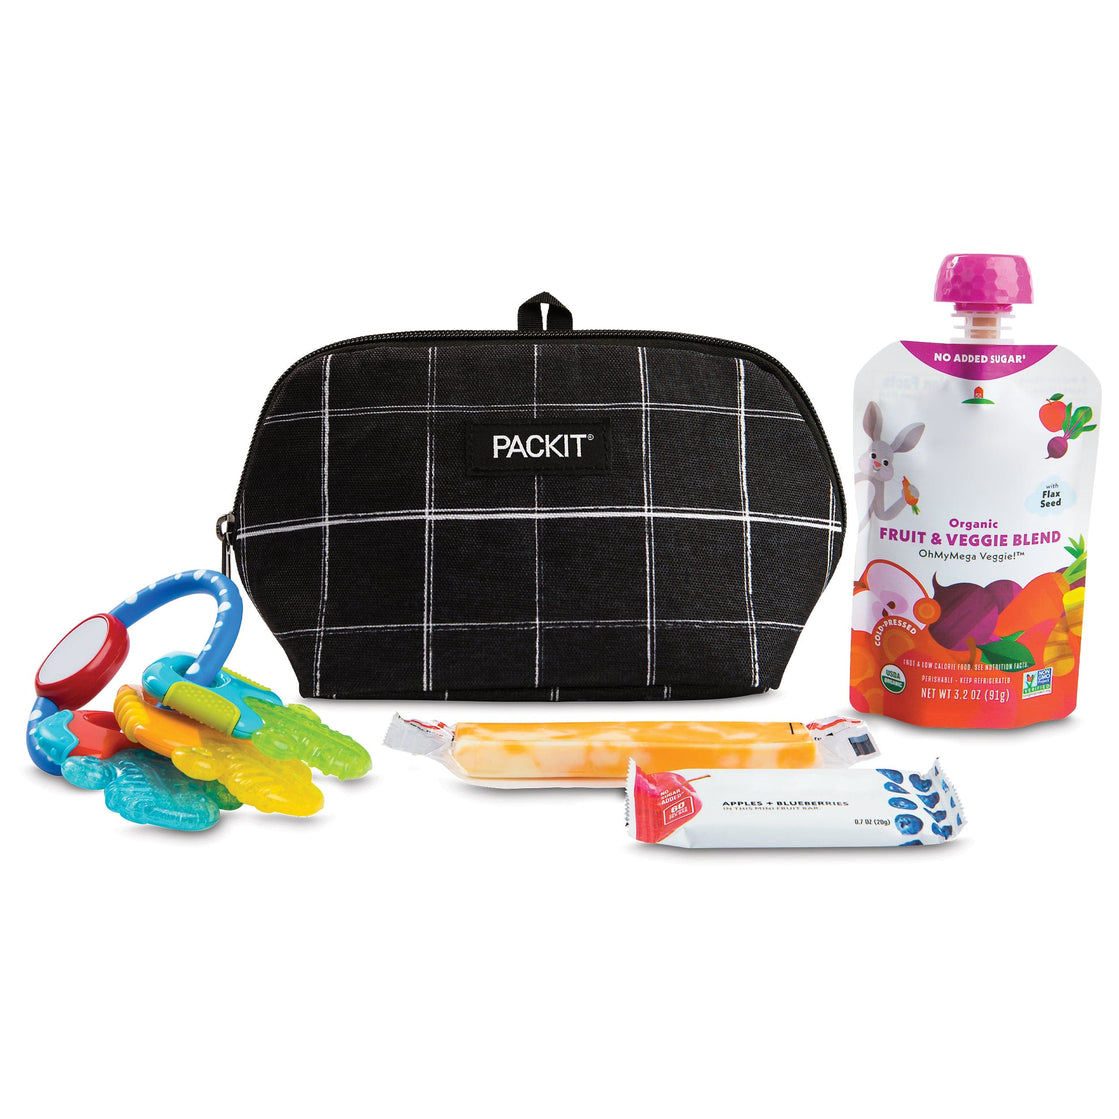 Kids Lunch Bag - Insulated Lunch Bag Kids with Water Bottle Holder -  Reusable Sn